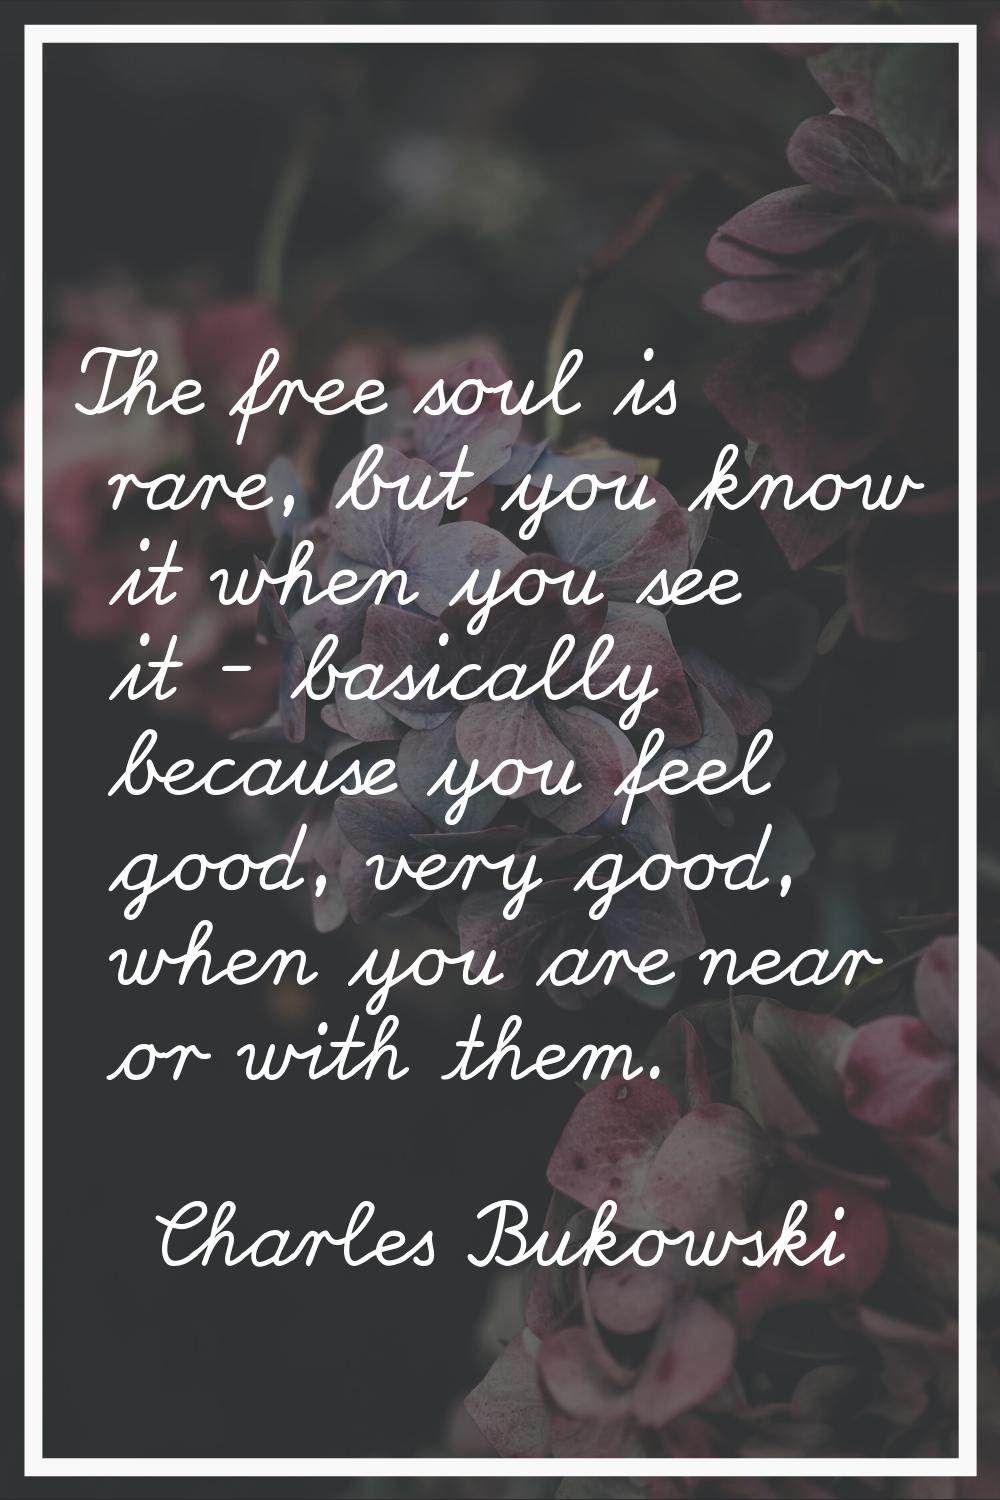 The free soul is rare, but you know it when you see it - basically because you feel good, very good